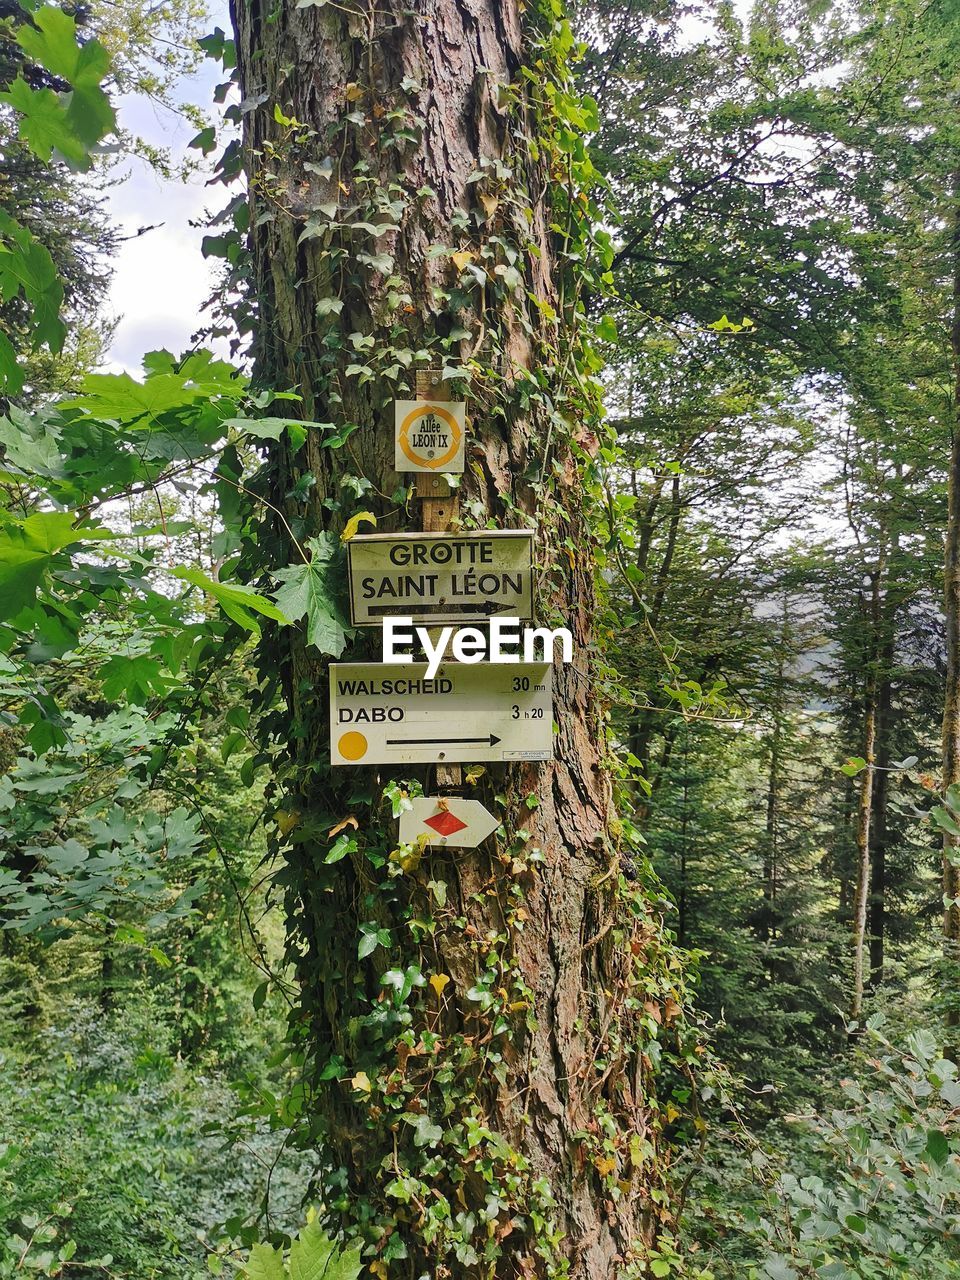 plant, tree, growth, trail, text, nature, communication, green, sign, tree trunk, forest, trunk, land, day, no people, western script, woodland, information sign, outdoors, guidance, natural environment, arrow symbol, beauty in nature, directional sign, tranquility, script, non-western script, foliage, lush foliage, branch